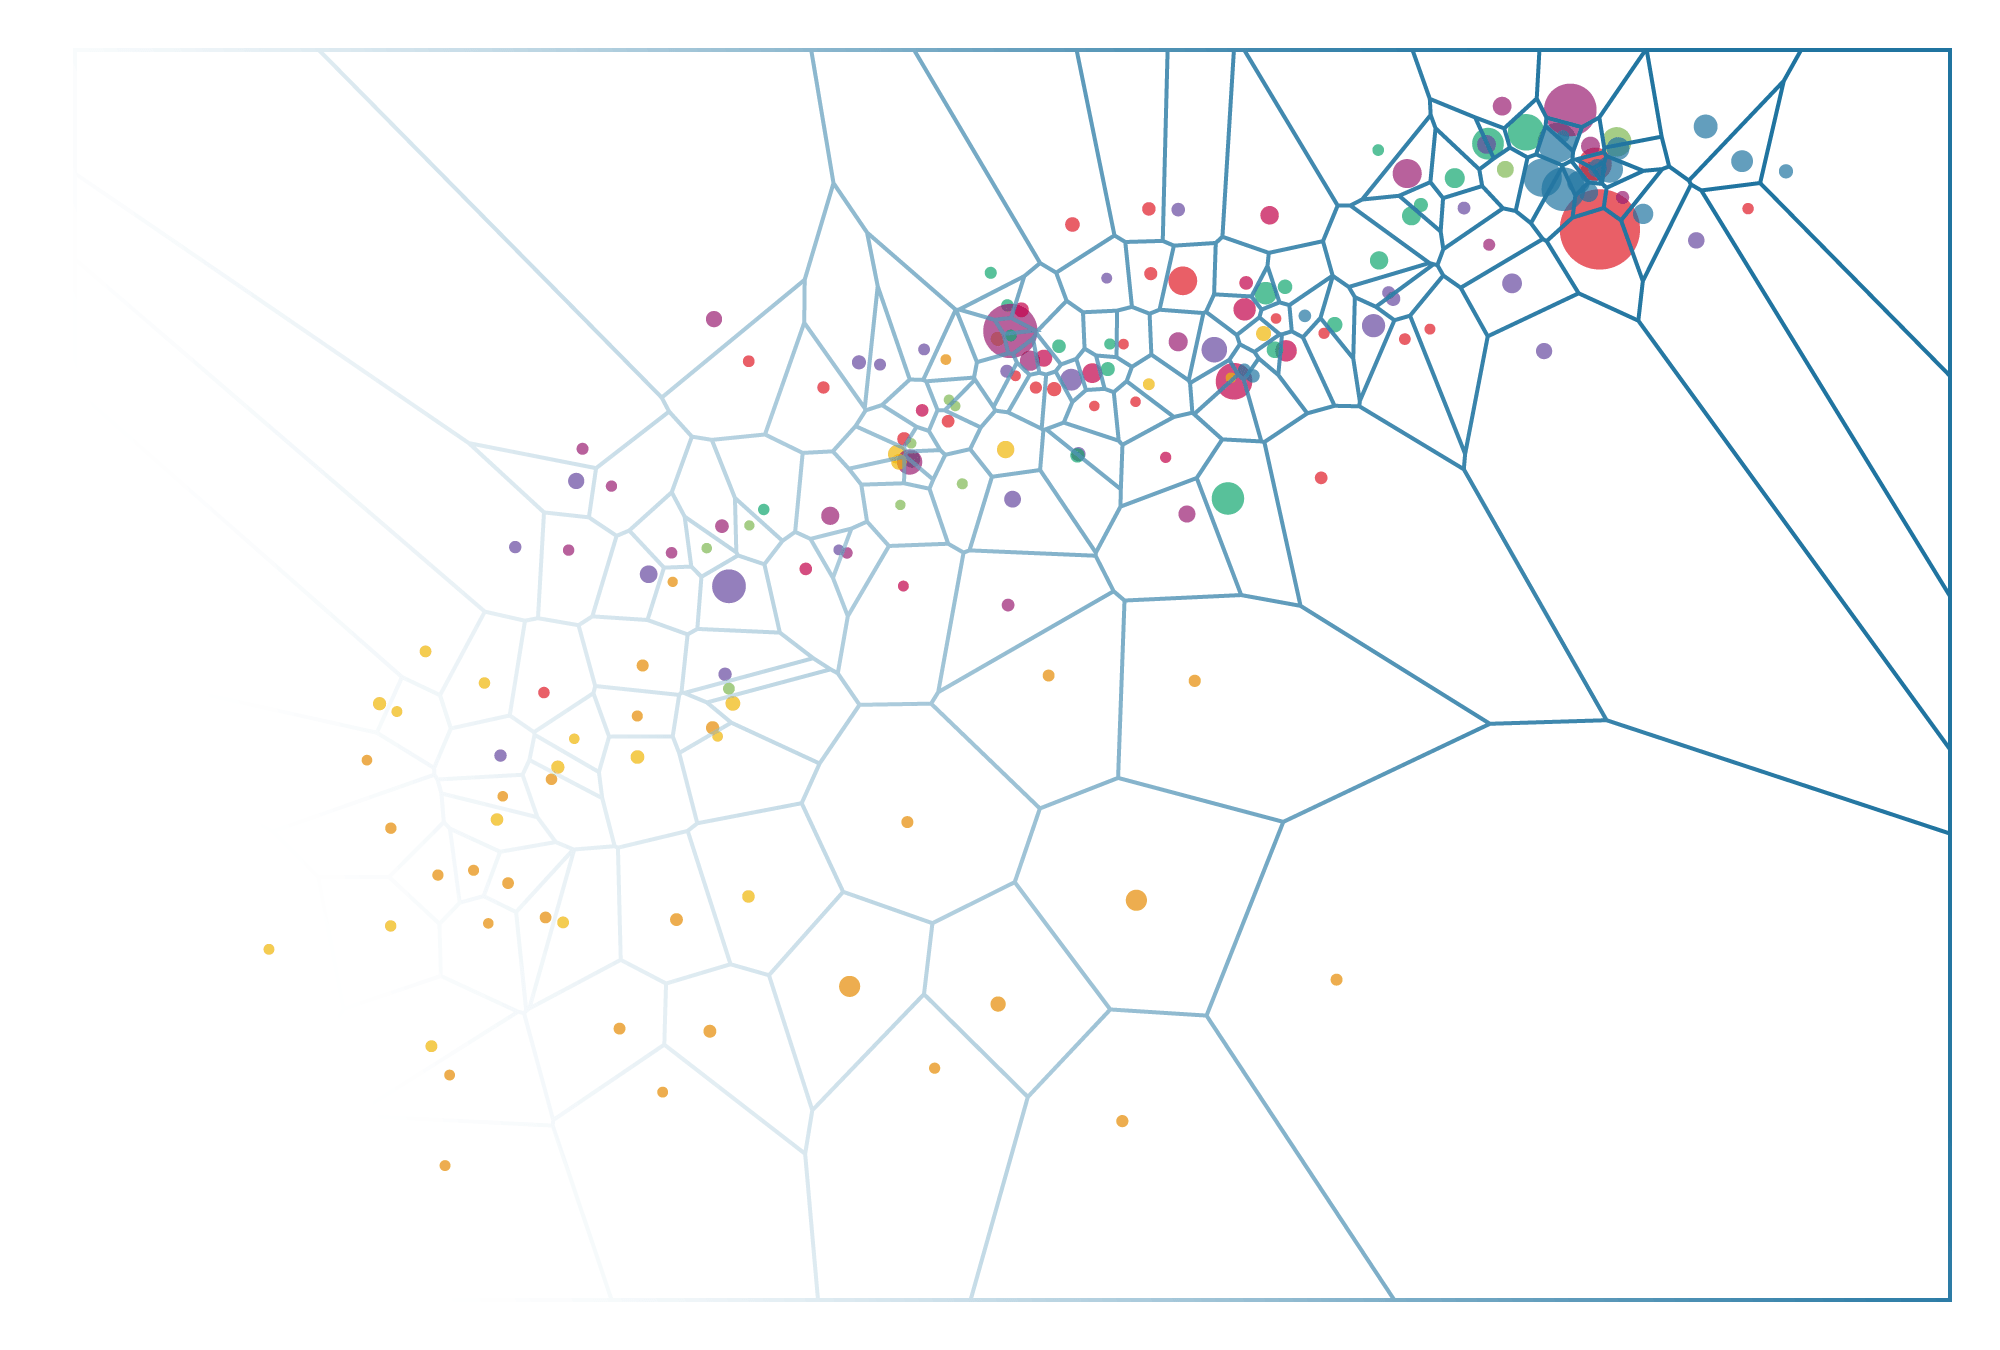 The scatterplot circles with the voronoi grid fading over it